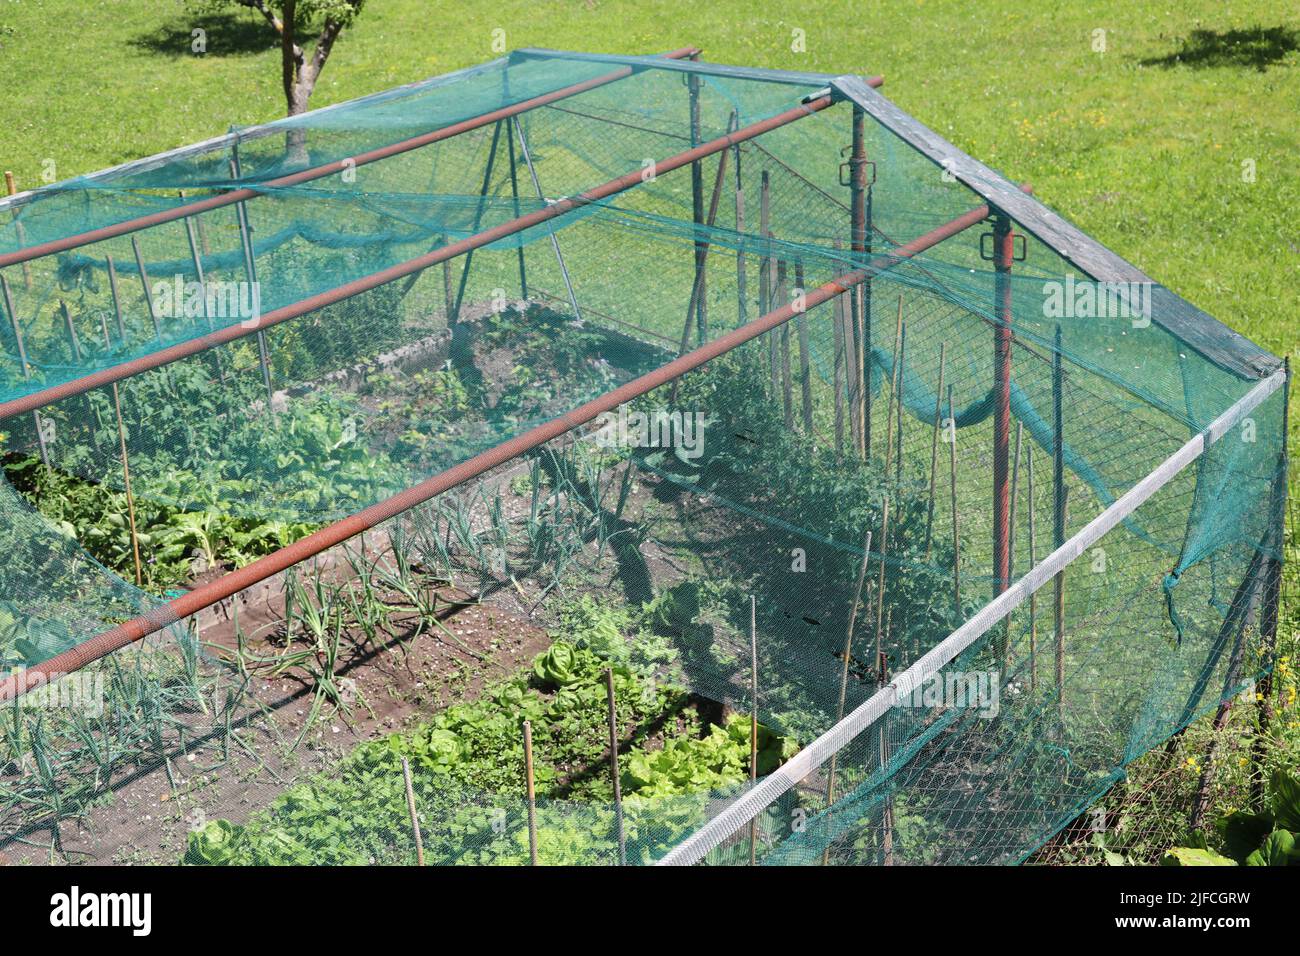 https://c8.alamy.com/comp/2JFCGRW/vegetable-garden-with-lettuce-and-vegetables-protected-by-a-large-green-anti-hail-net-to-protect-the-garden-even-from-birds-that-eat-the-vegetables-an-2JFCGRW.jpg